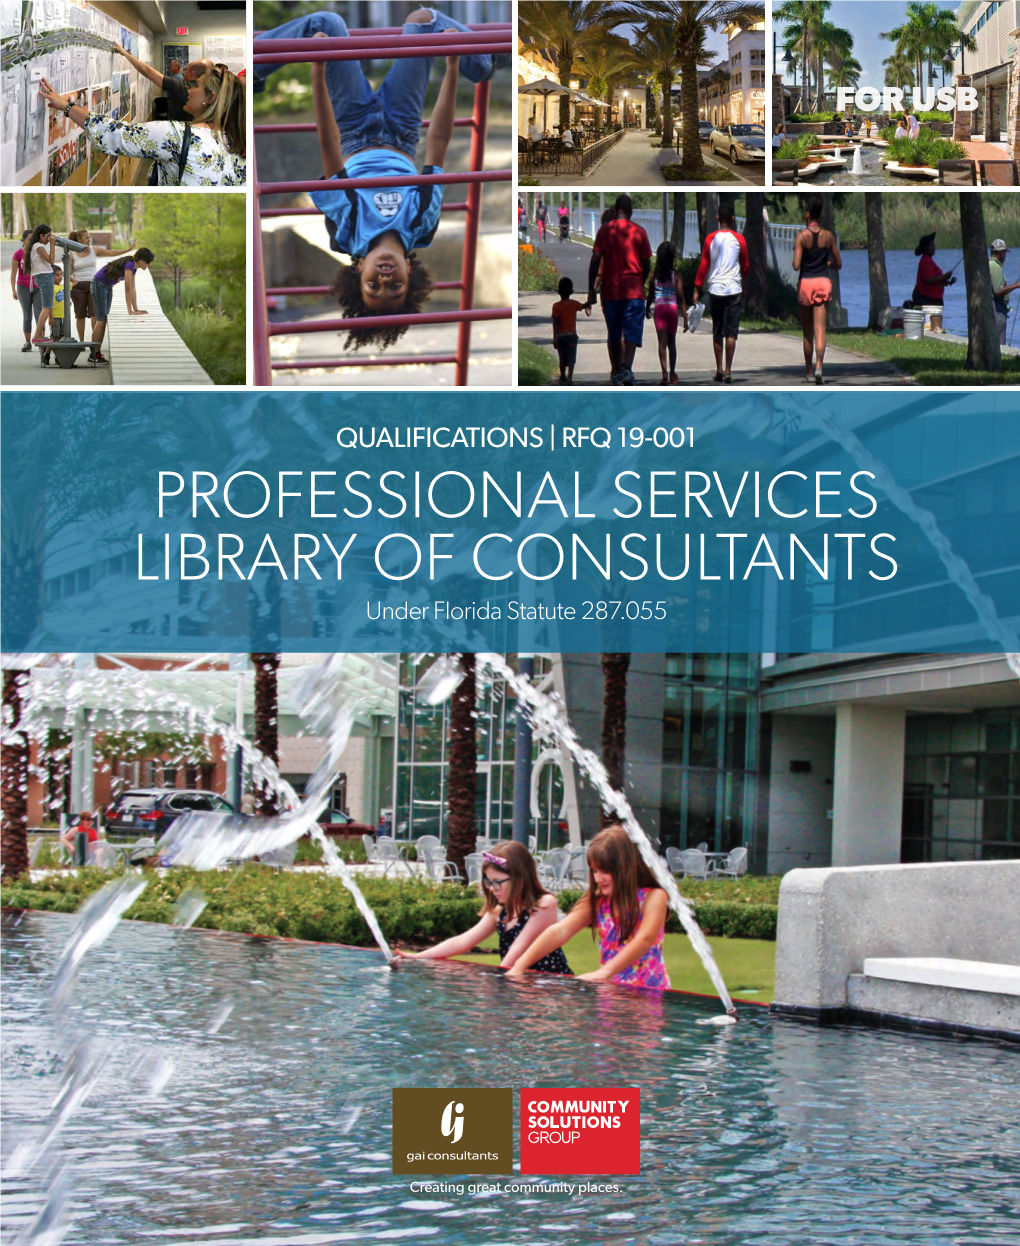 PROFESSIONAL SERVICES LIBRARY of CONSULTANTS Under Florida Statute 287.055